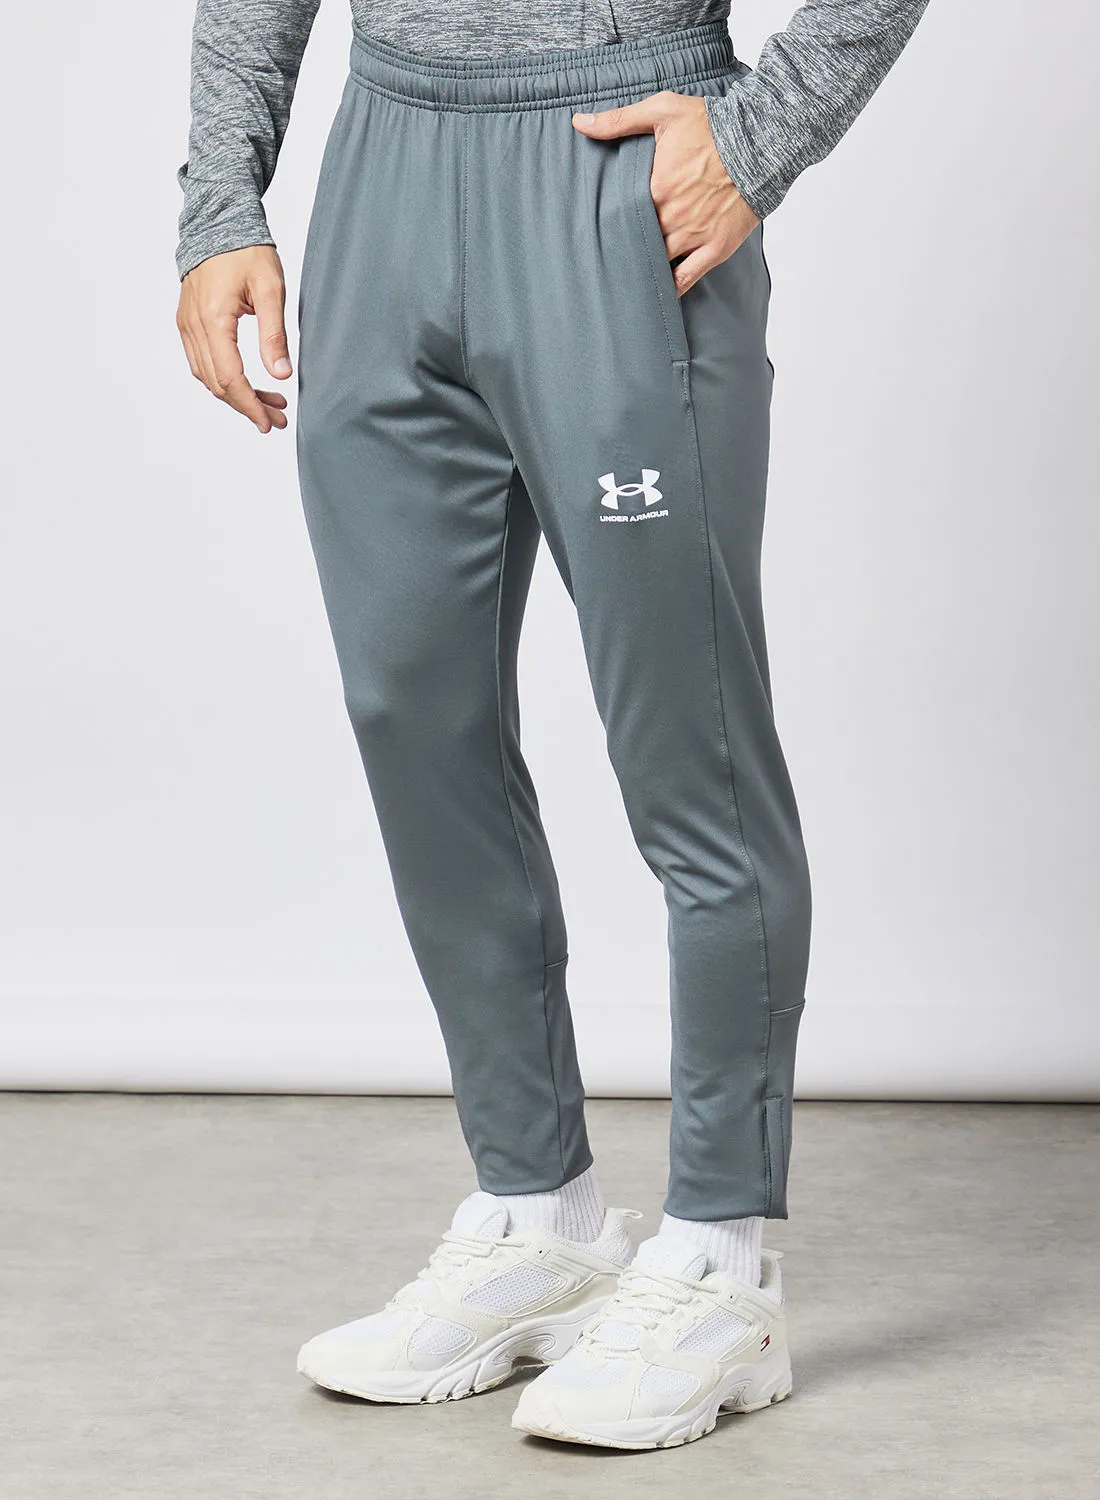 UNDER ARMOUR Challenger Training Pants Grey